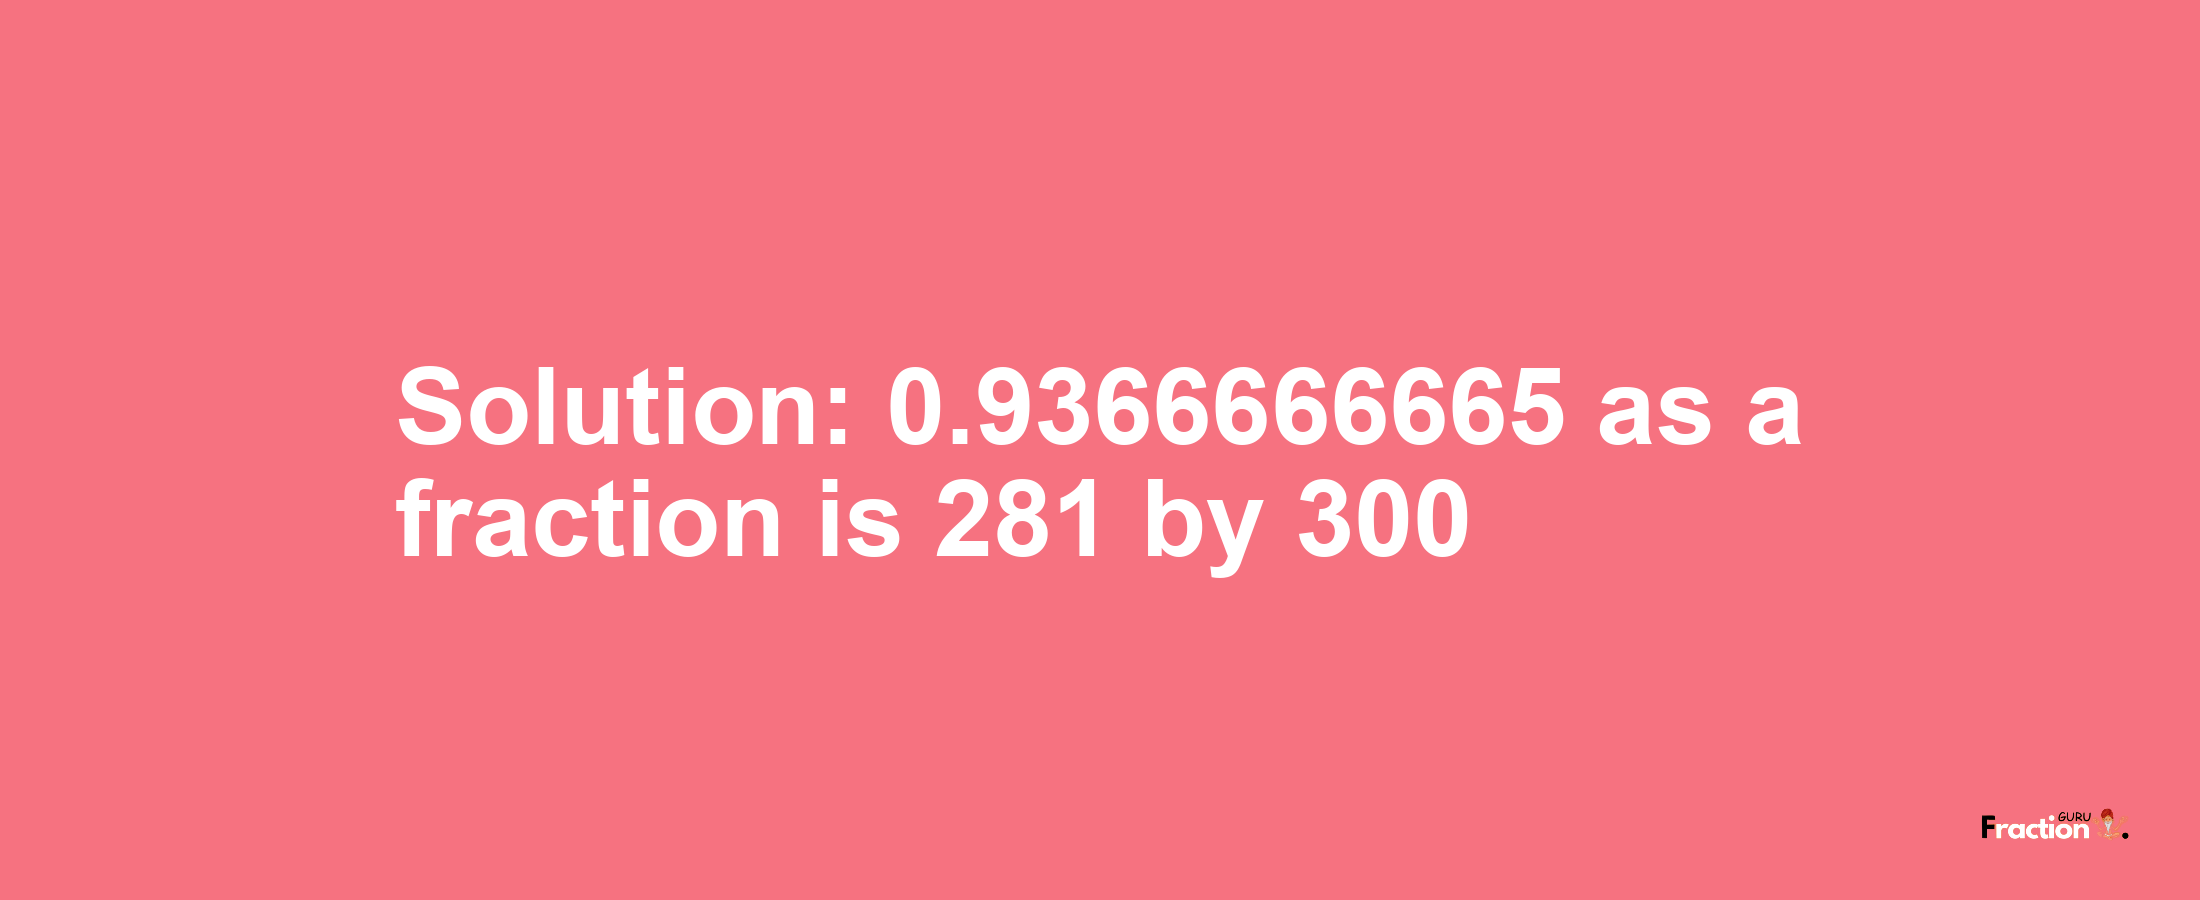 Solution:0.9366666665 as a fraction is 281/300